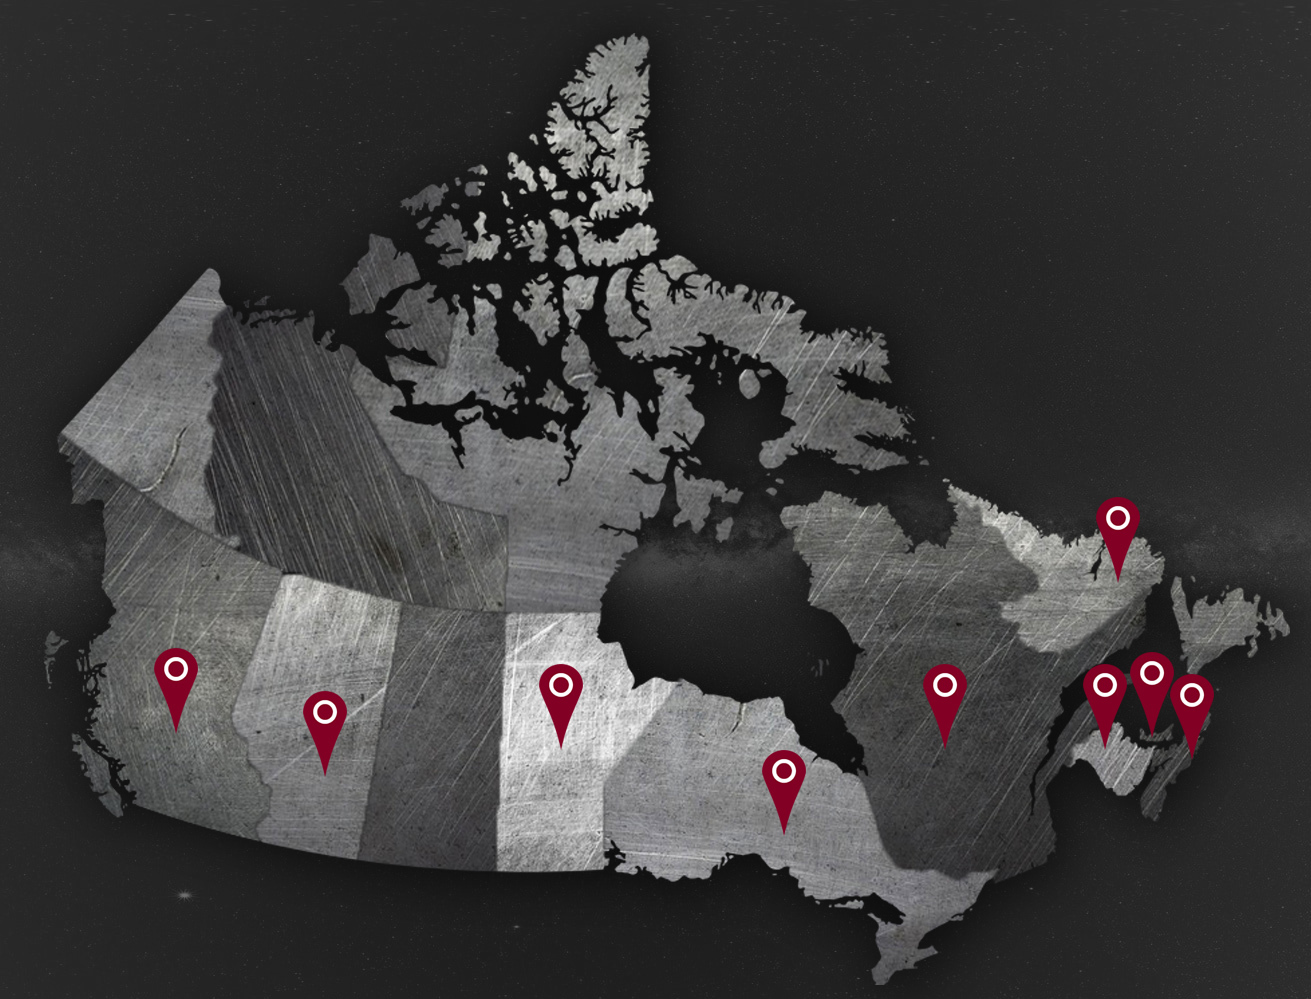 Map of Canada with Project Locations